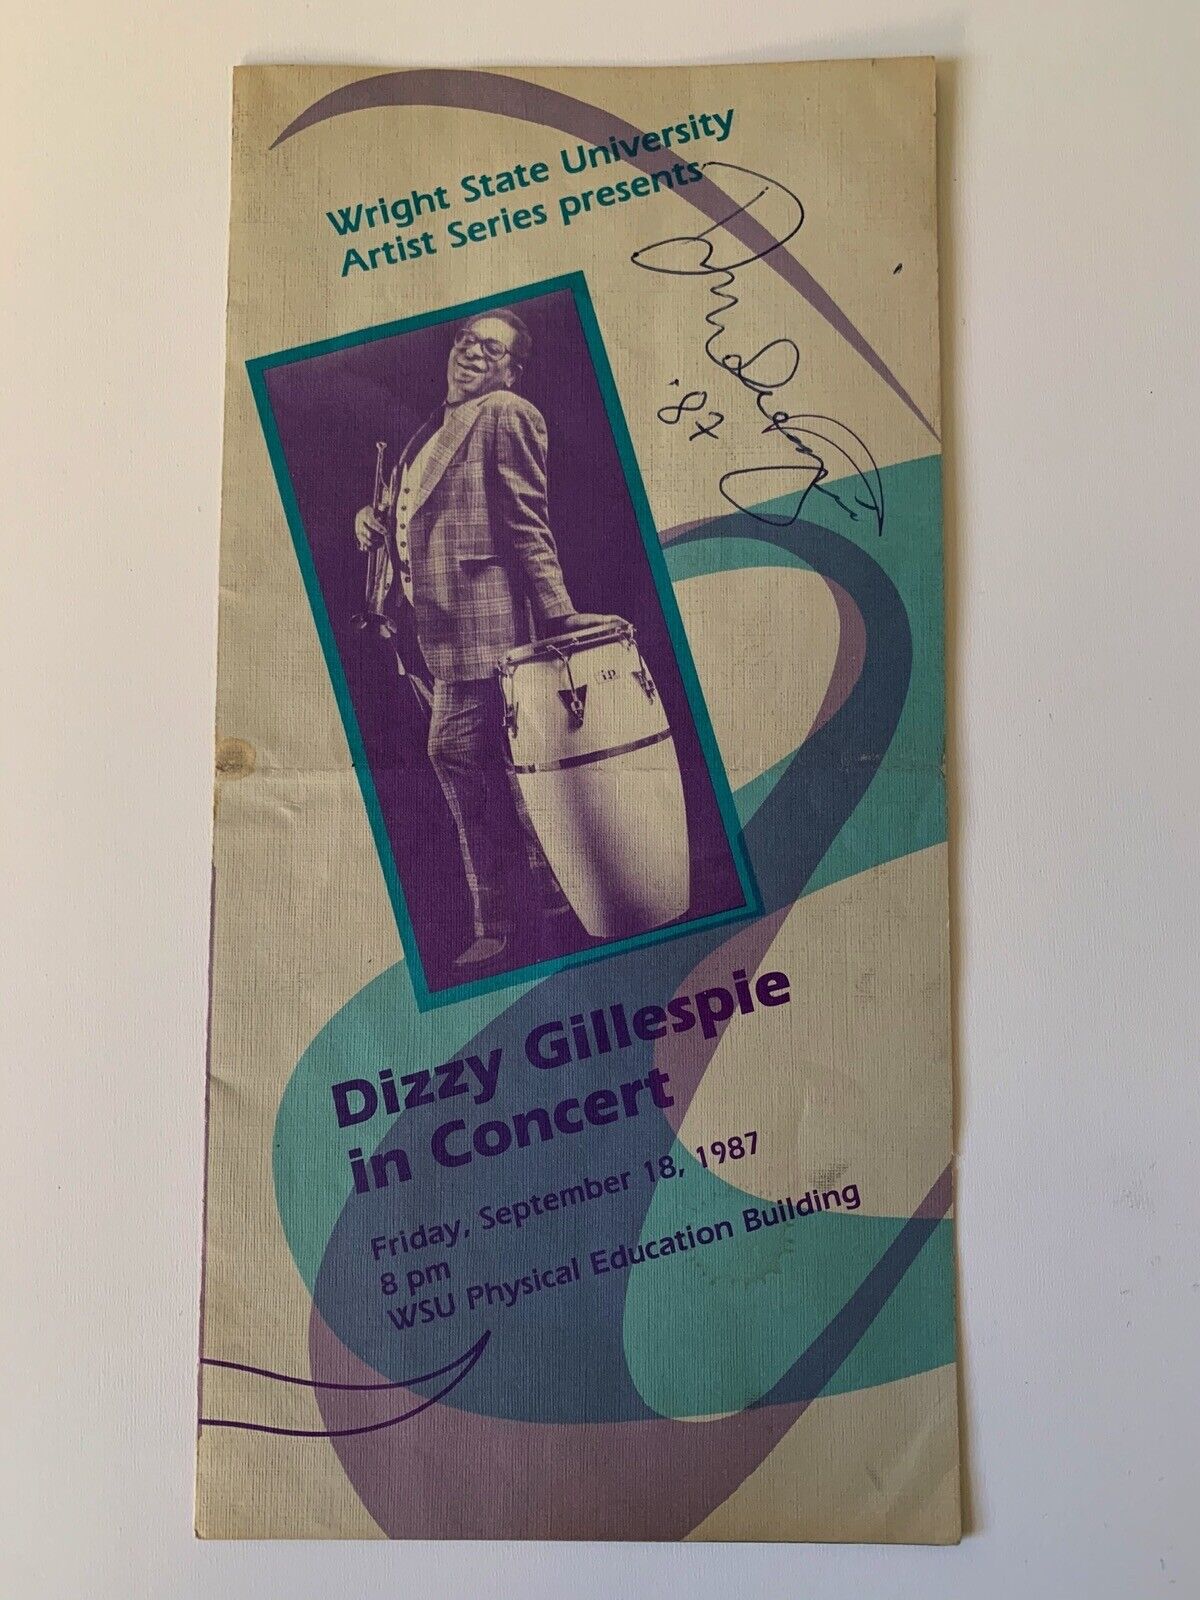 Dizzy Gillespie Signed Autograph Wright State In Concert Pamphlet PSA DNA j2f1c